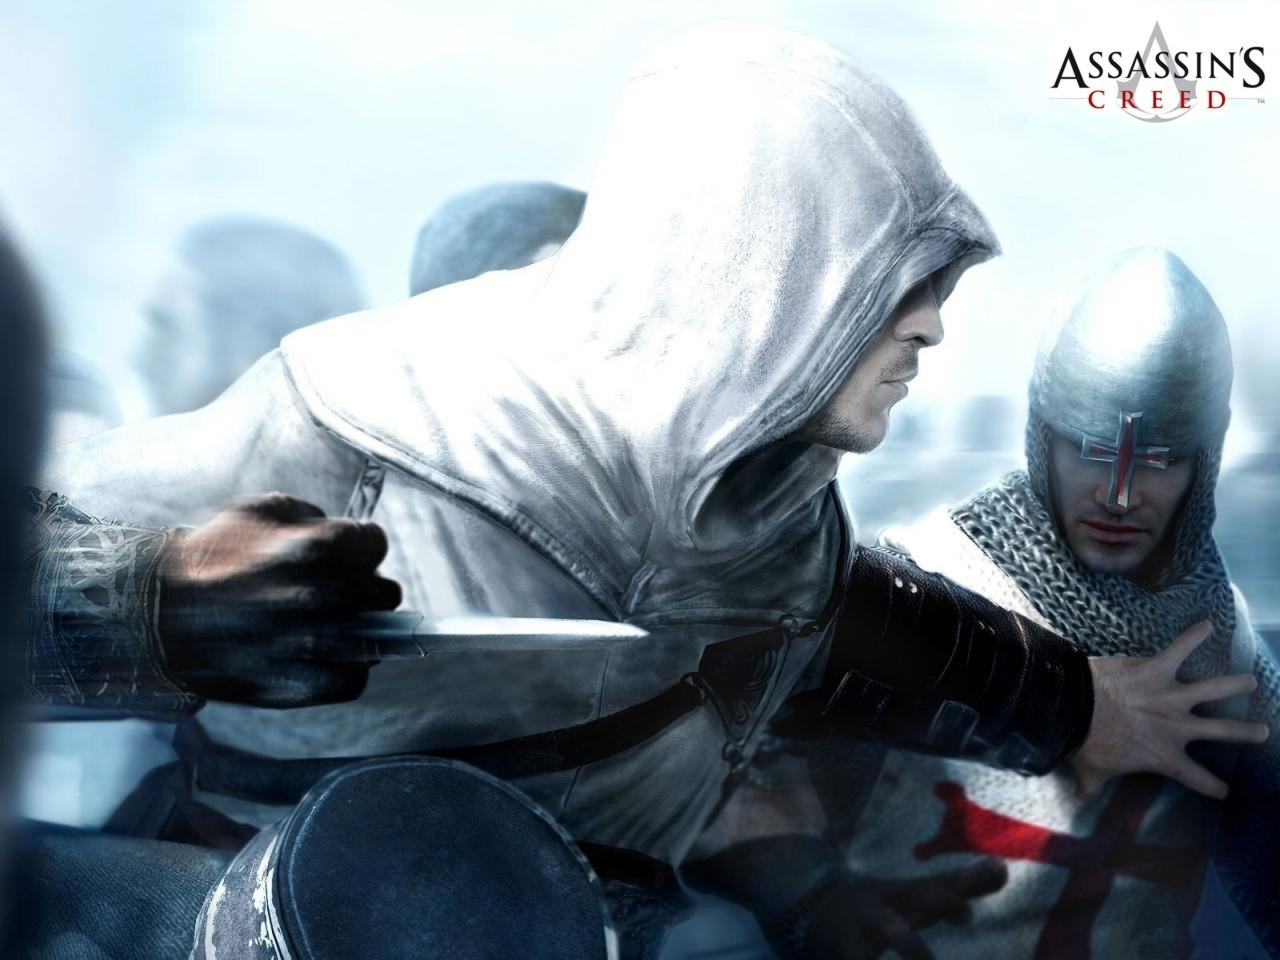 Assassin's Creed Altair Wallpaper - Assassin's Creed 1 , HD Wallpaper & Backgrounds